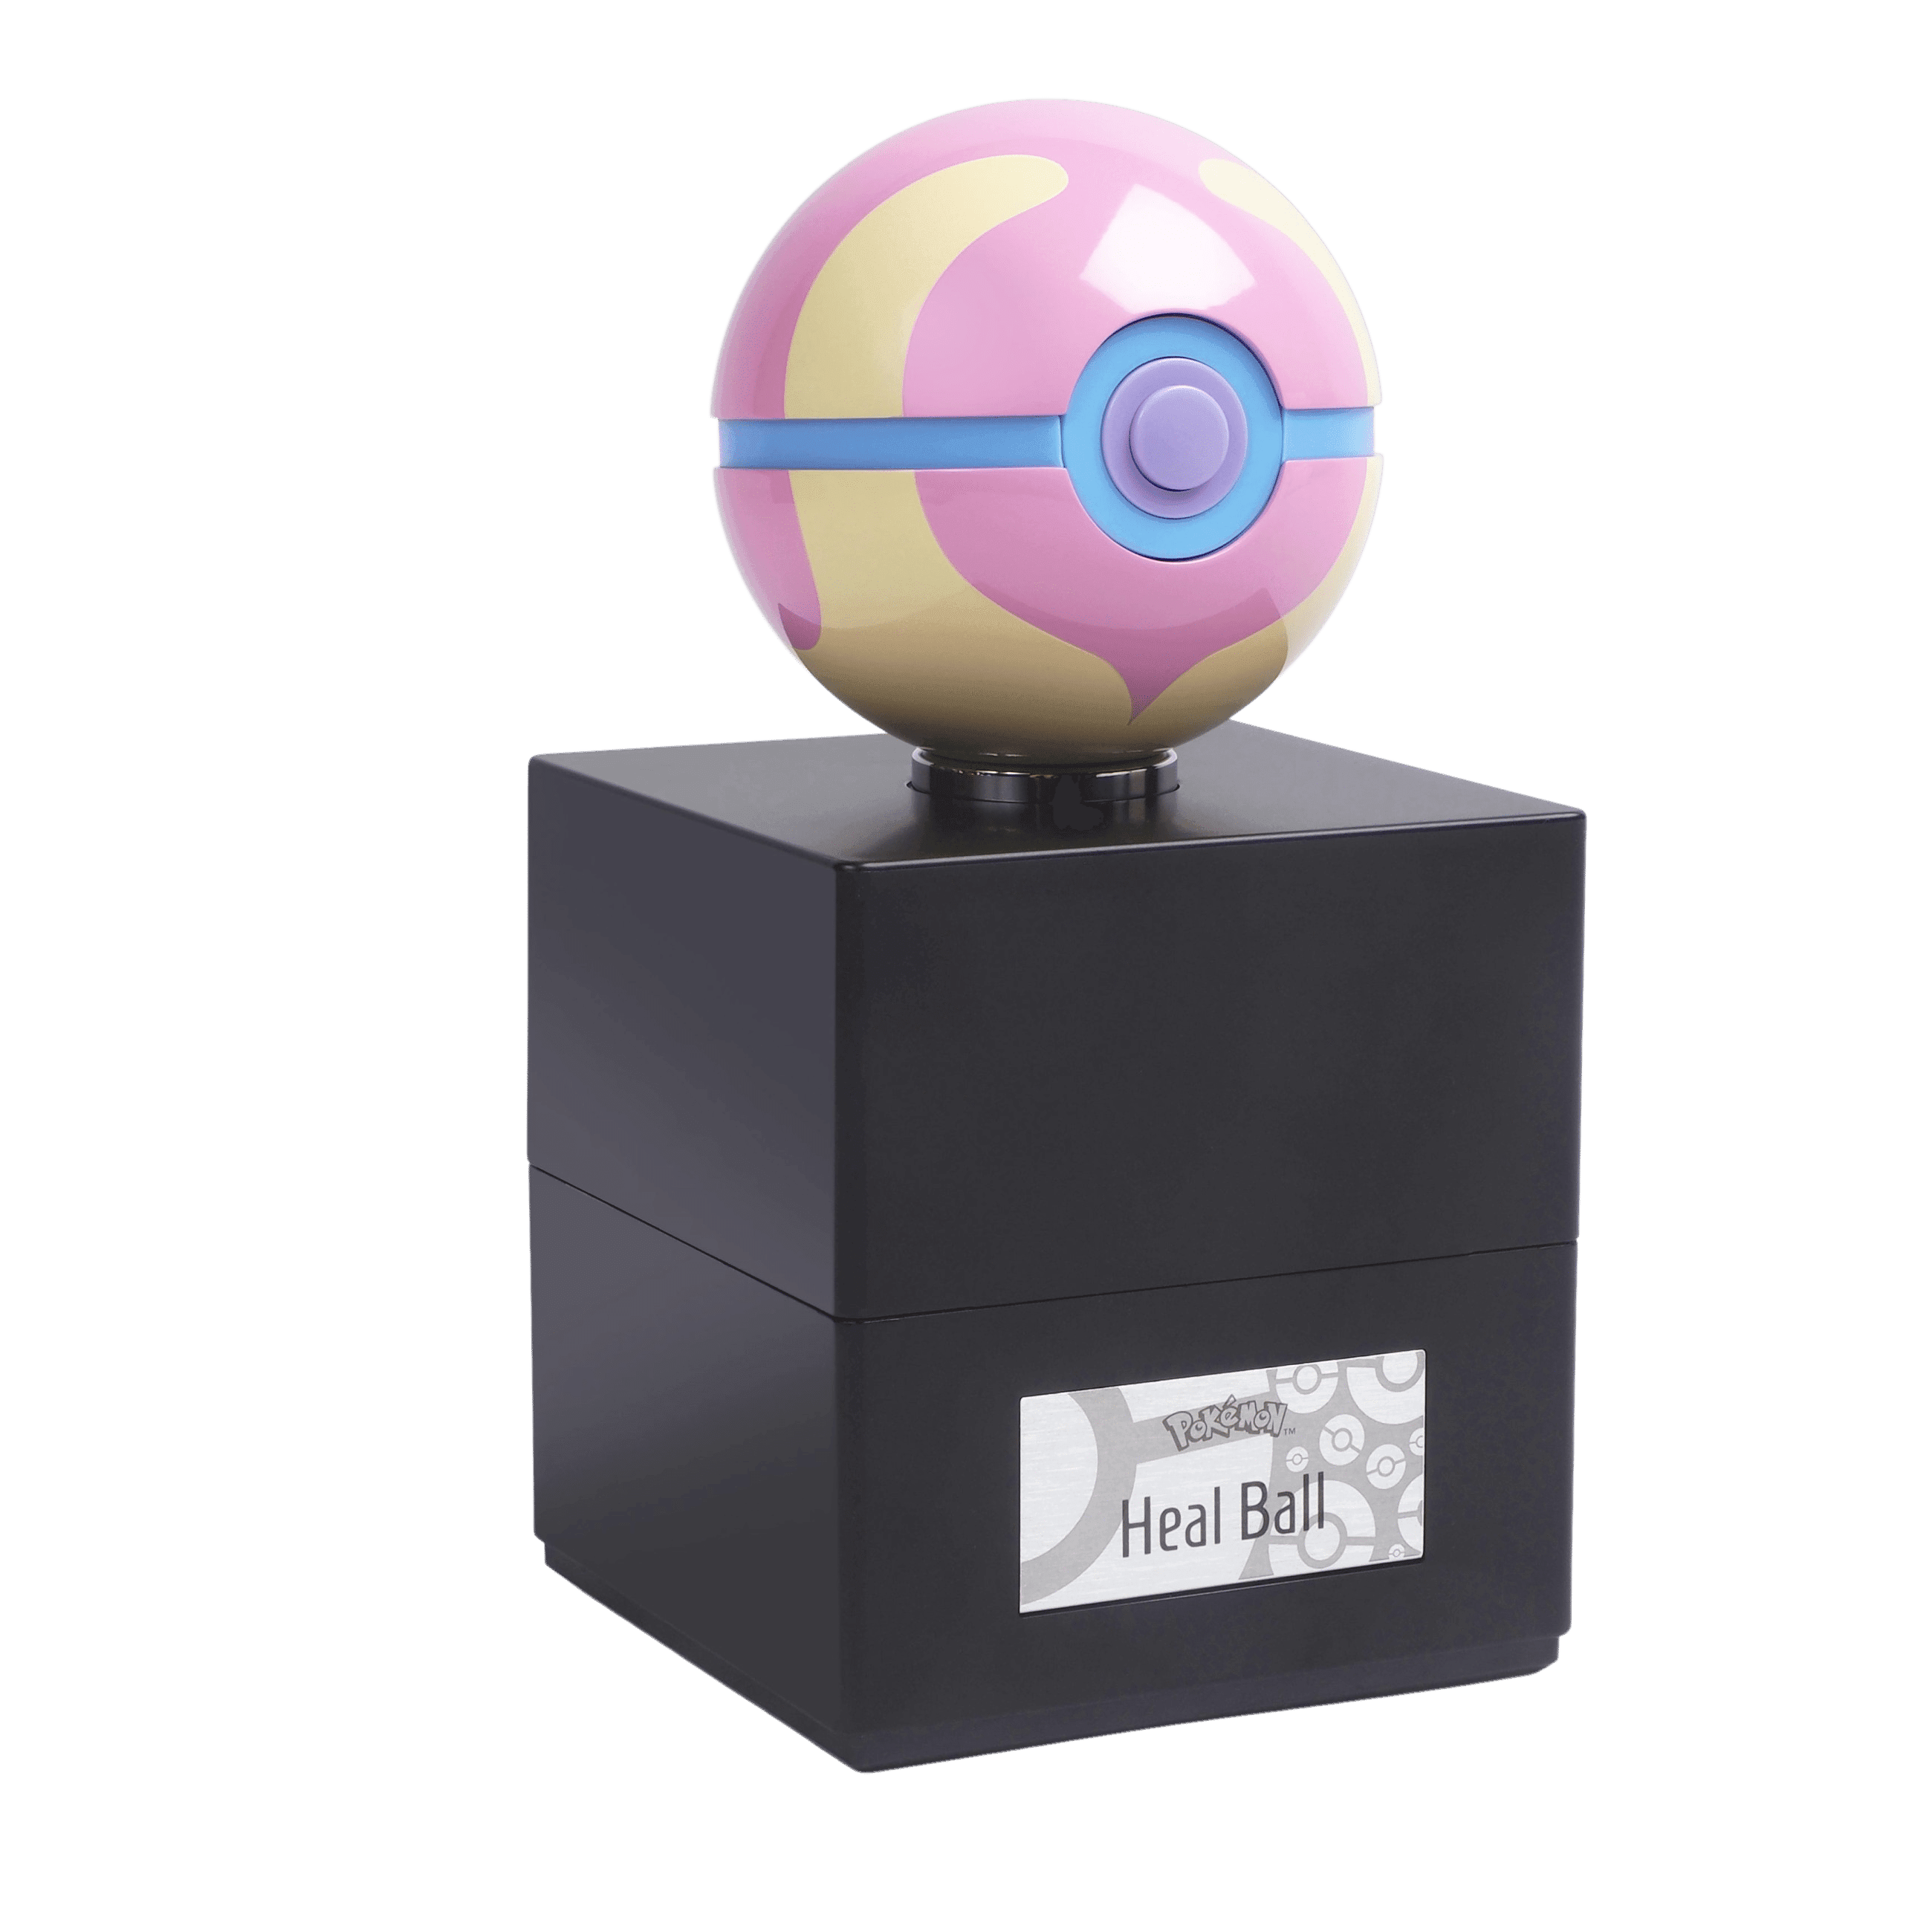 The Wand Company: Pokemon Die-Cast Heal Ball Replica - The Card Vault